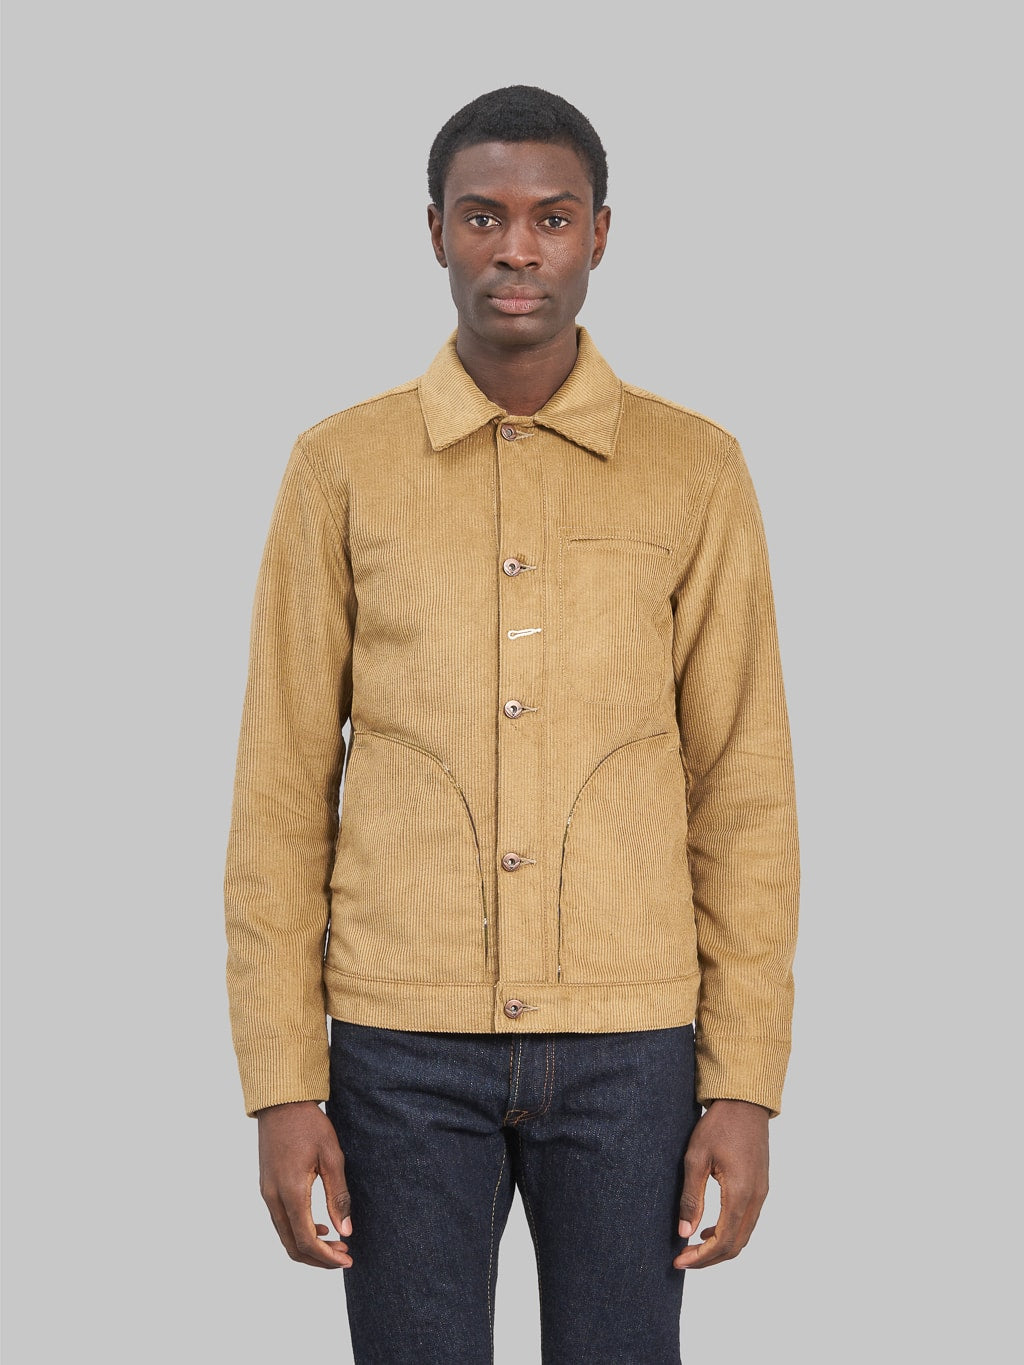 Rogue Territory Supply Jacket Lined Tan Corduroy front fit